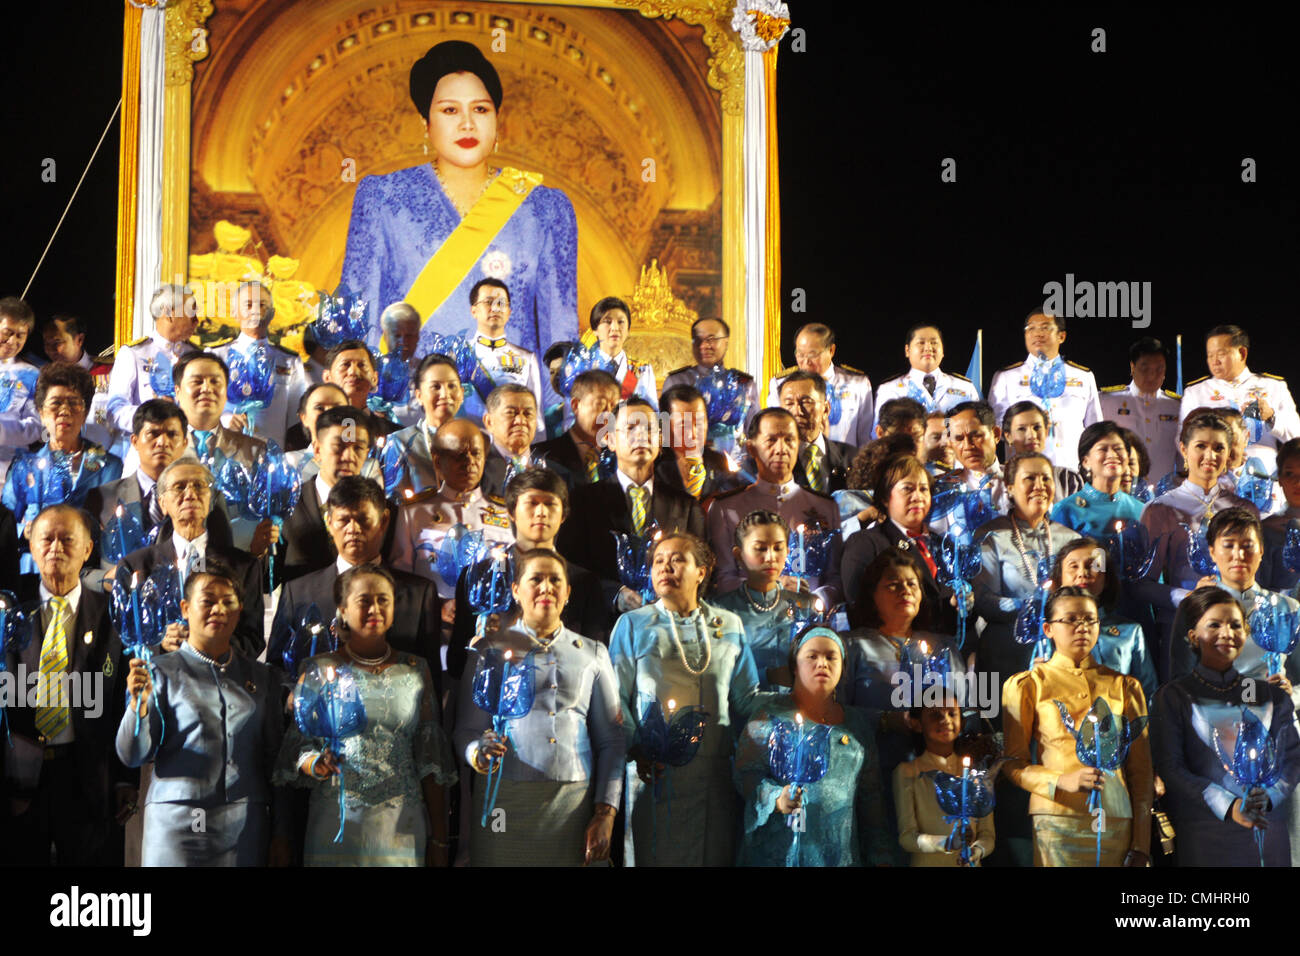 The Royal Field , Bangkok , Thailand , August 12 , 2012 . Thai Prime minister during a ceremony .Thais nationwide celebrate Her Majesty the Queen's 80th birthday with numerous celebrations and ceremonies. Stock Photo